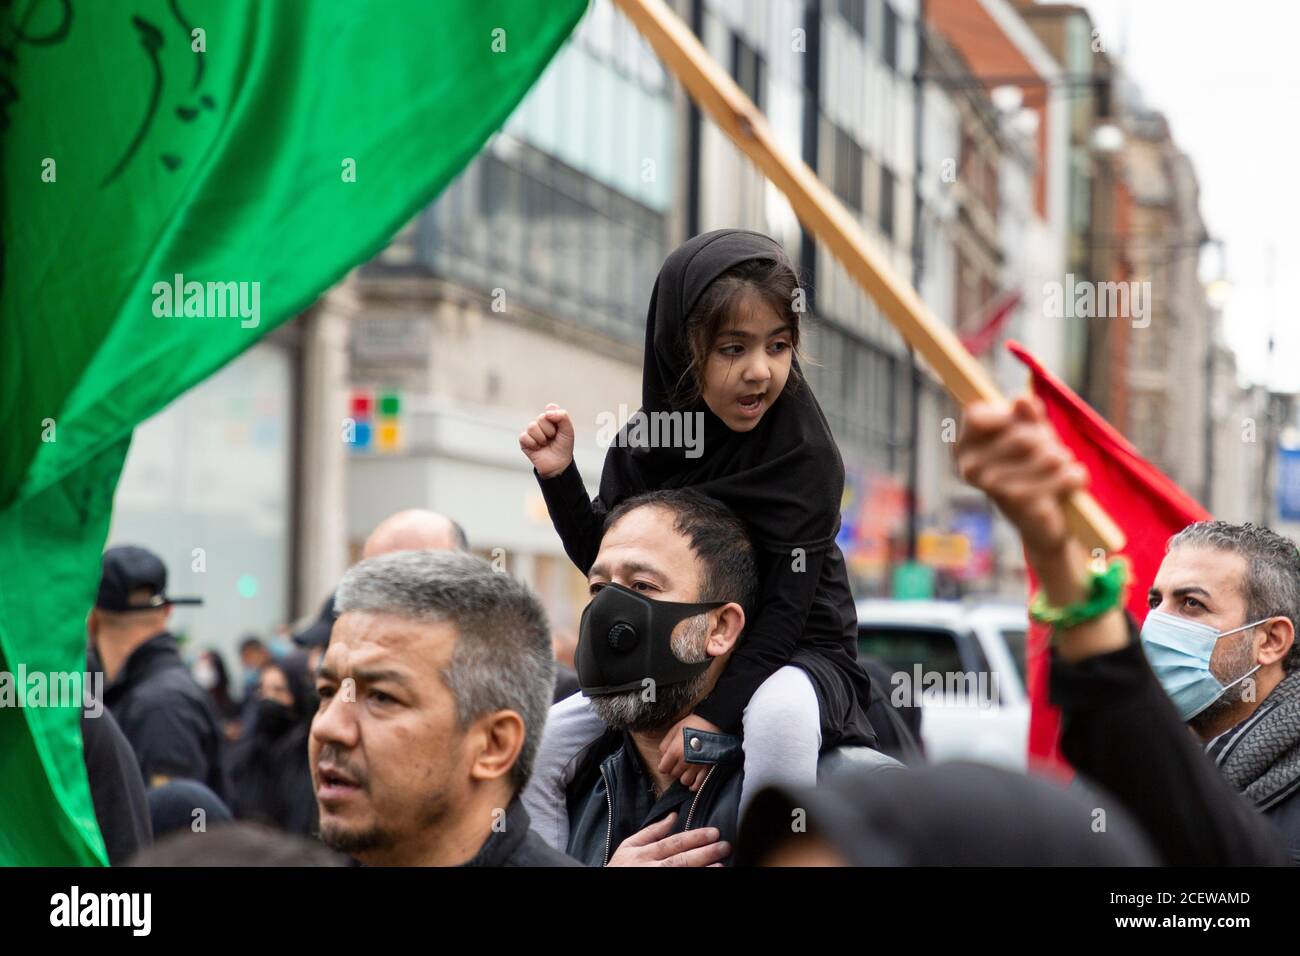 A young girl riding piggyback during Ashura Day event for Shia Muslims, Oxford Circus, London, 30 August 2020 Stock Photo